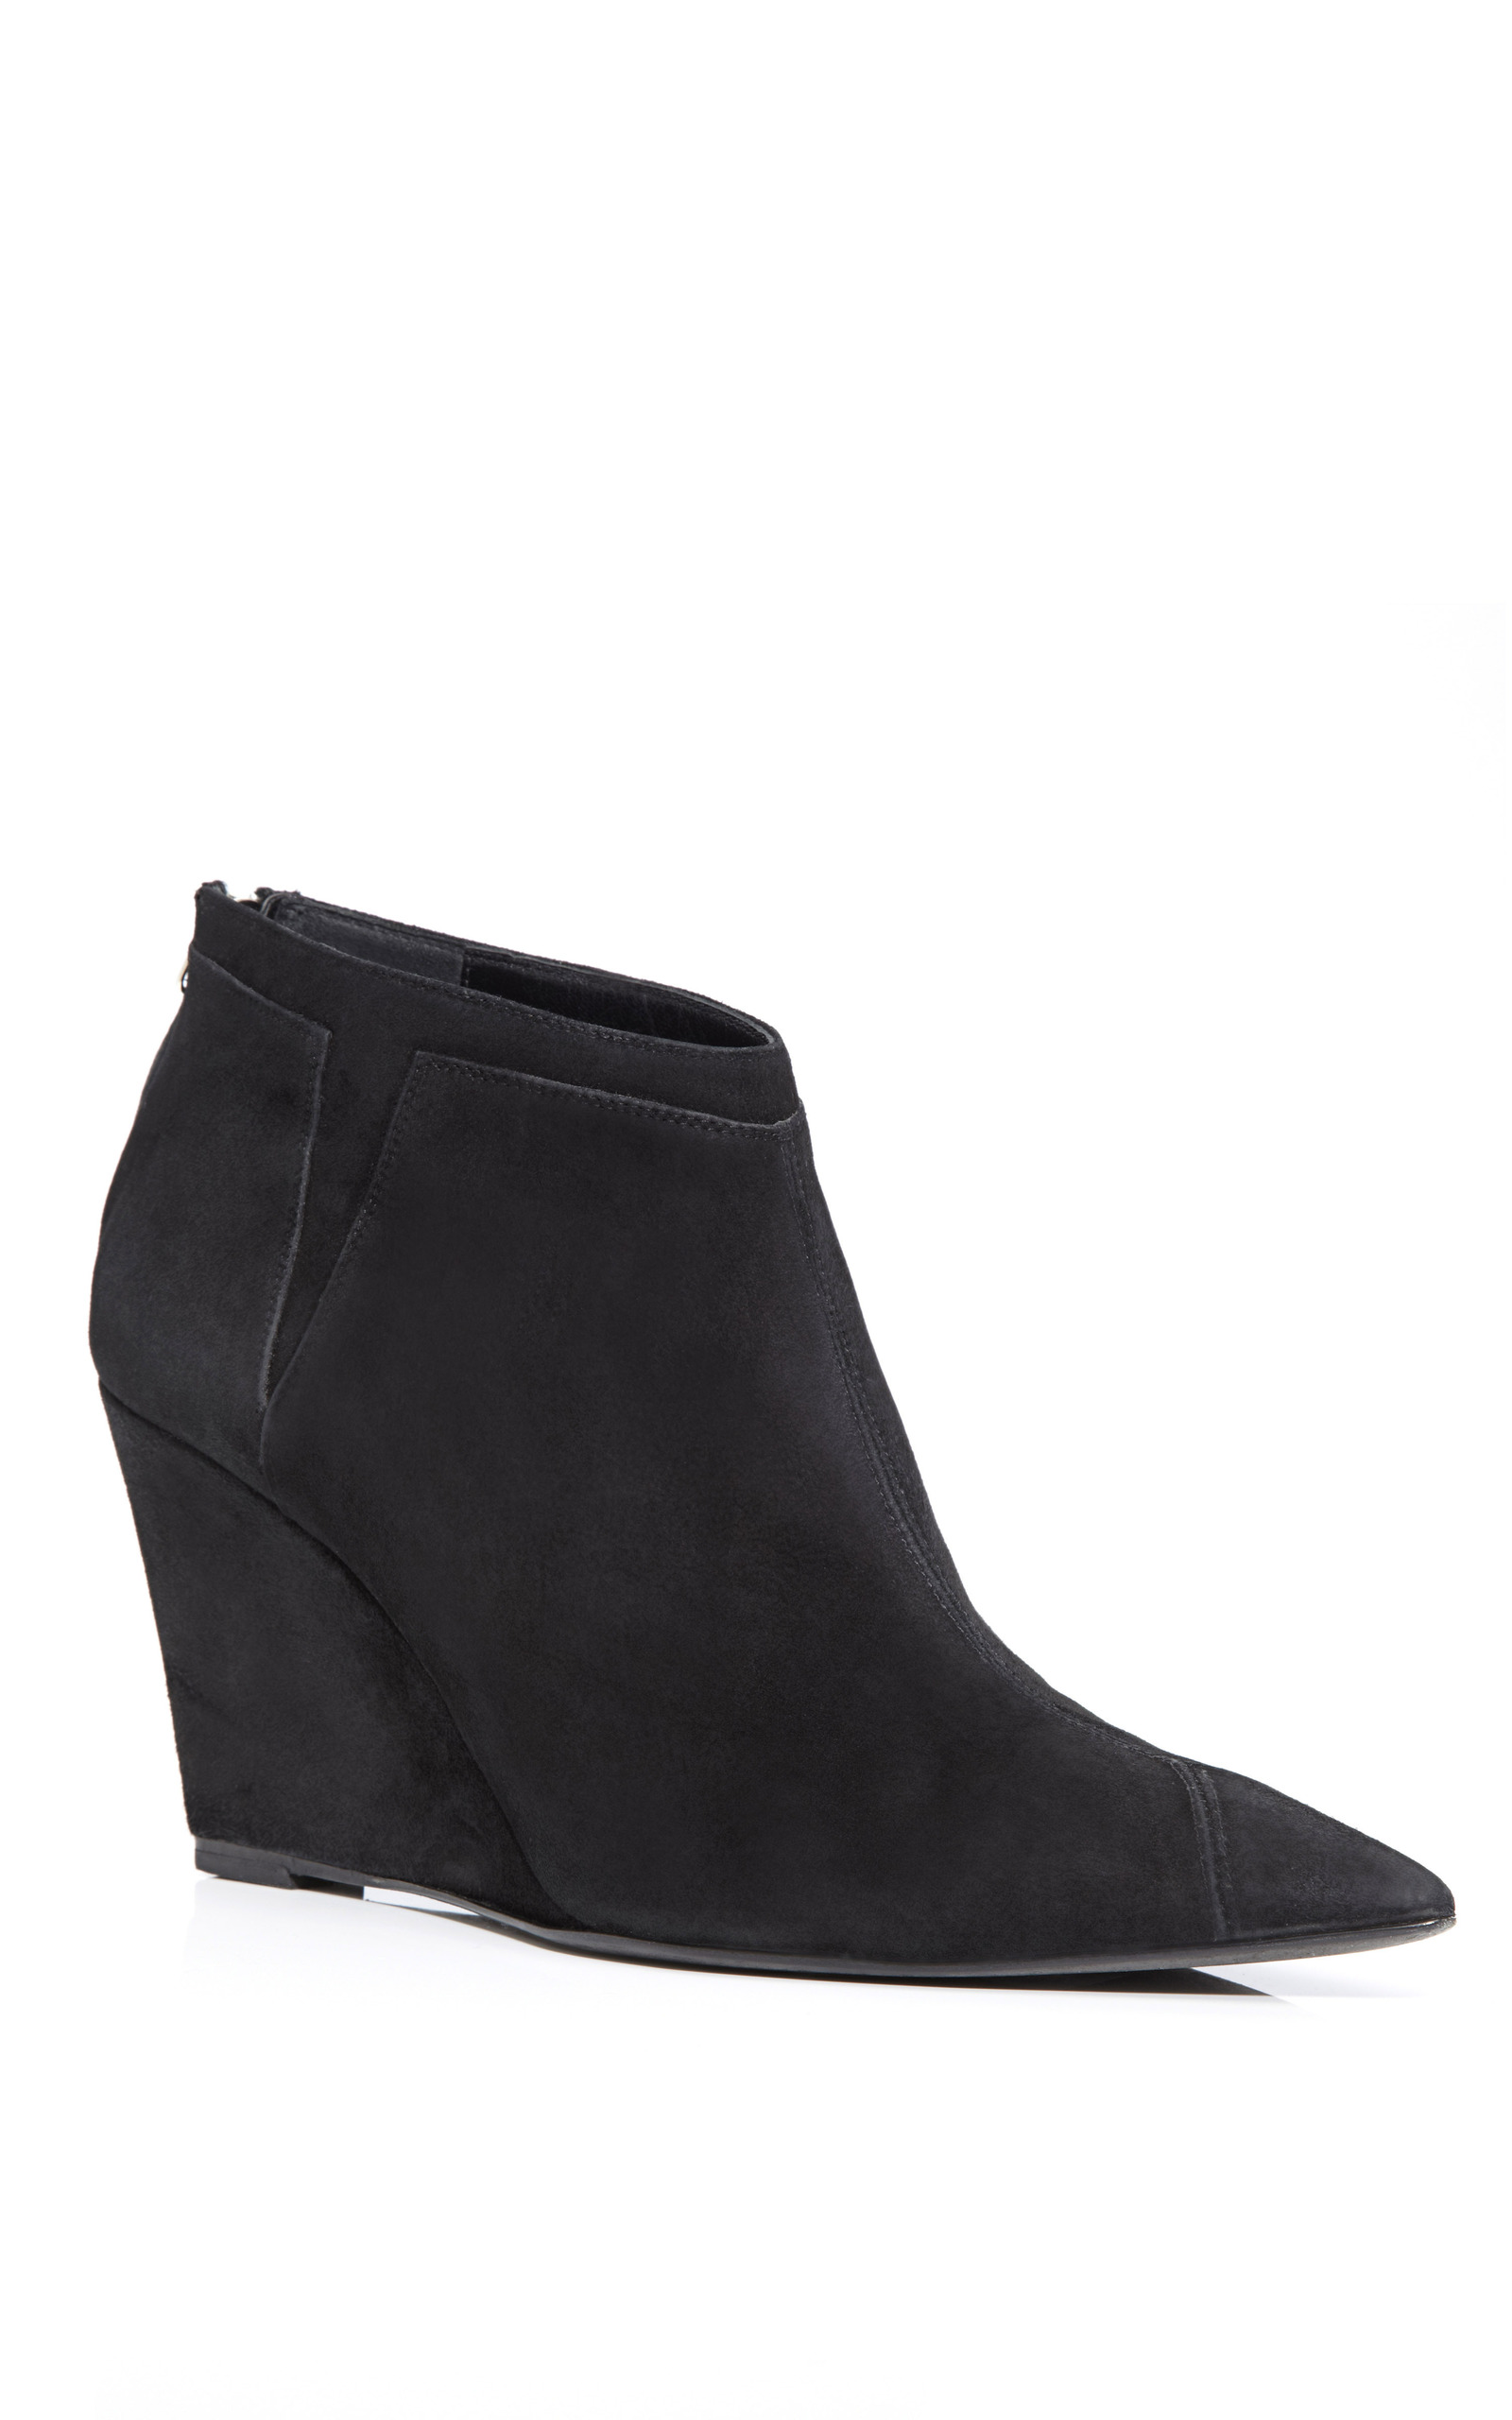 pointed wedge booties